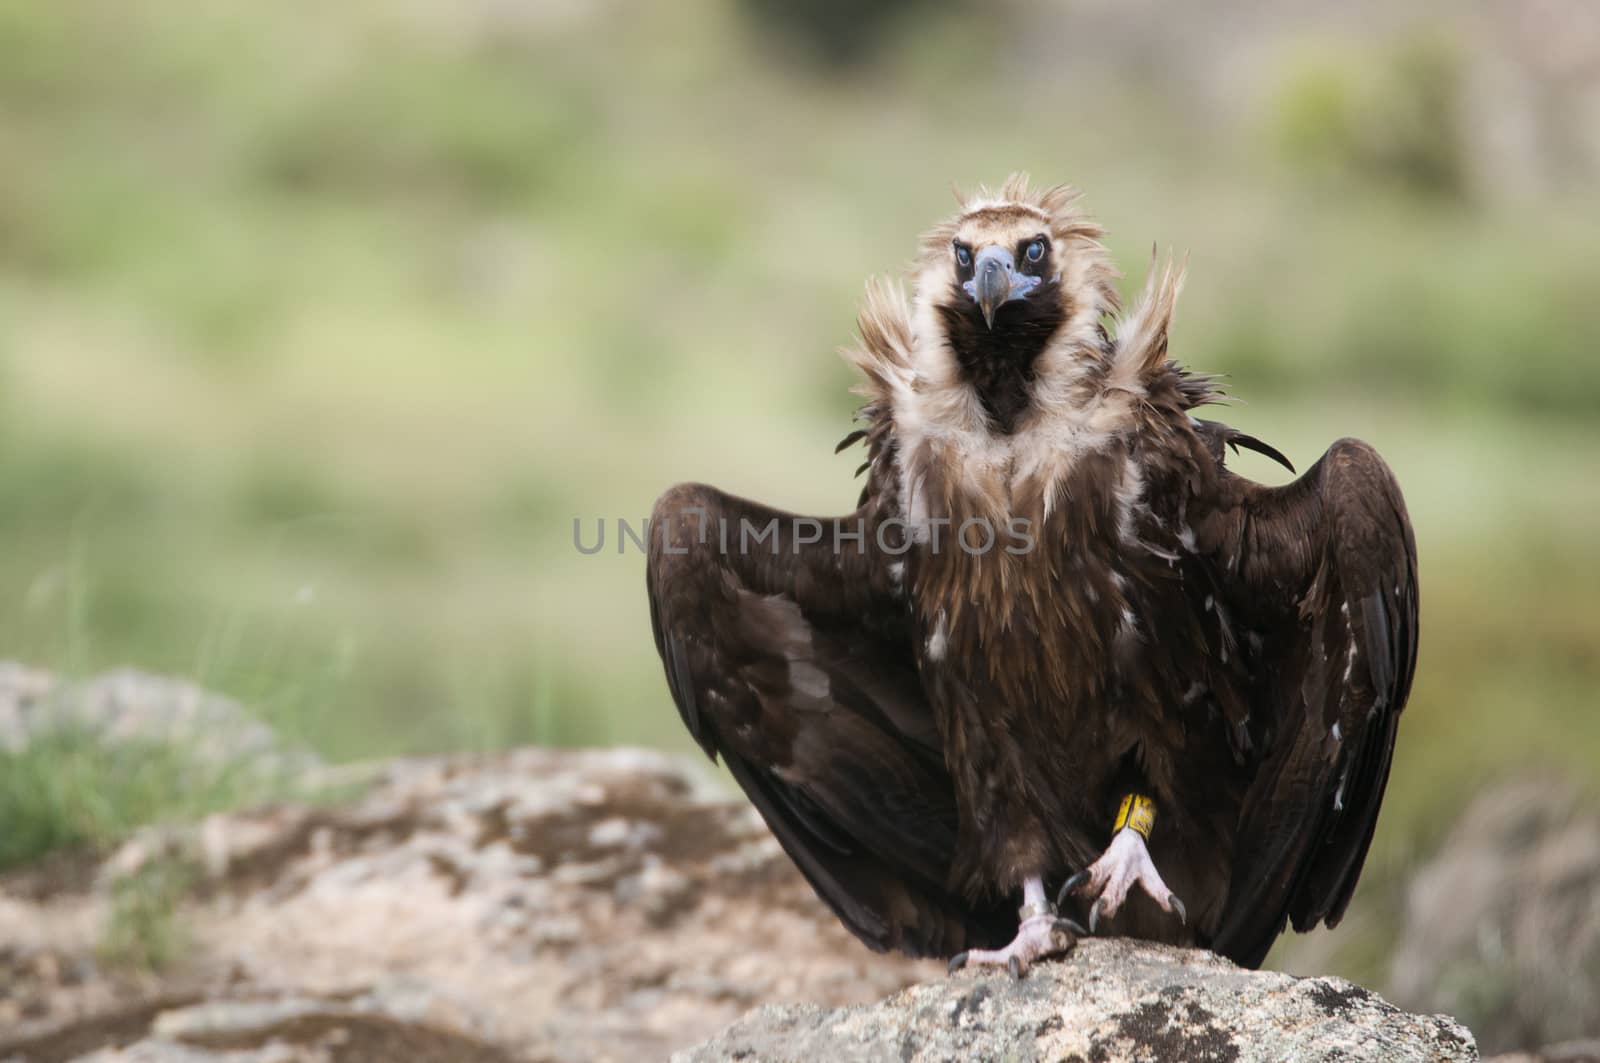 Cinereous Vulture, Aegypius monachus, standing on a rock by jalonsohu@gmail.com